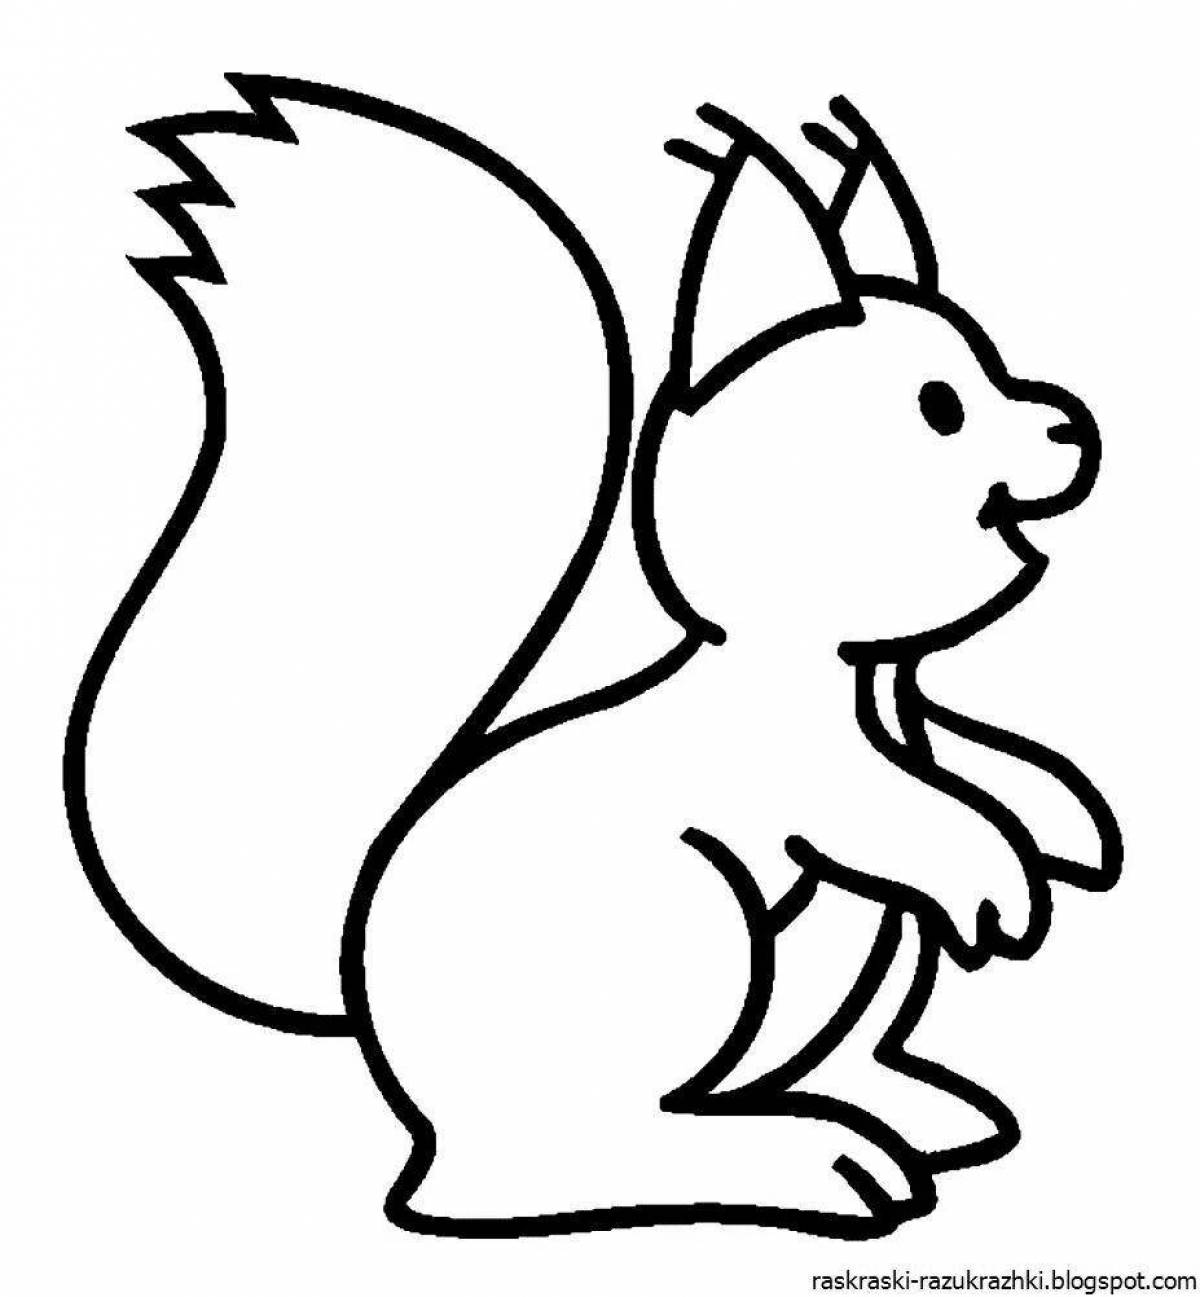 Adorable squirrel coloring book for 3-4 year olds